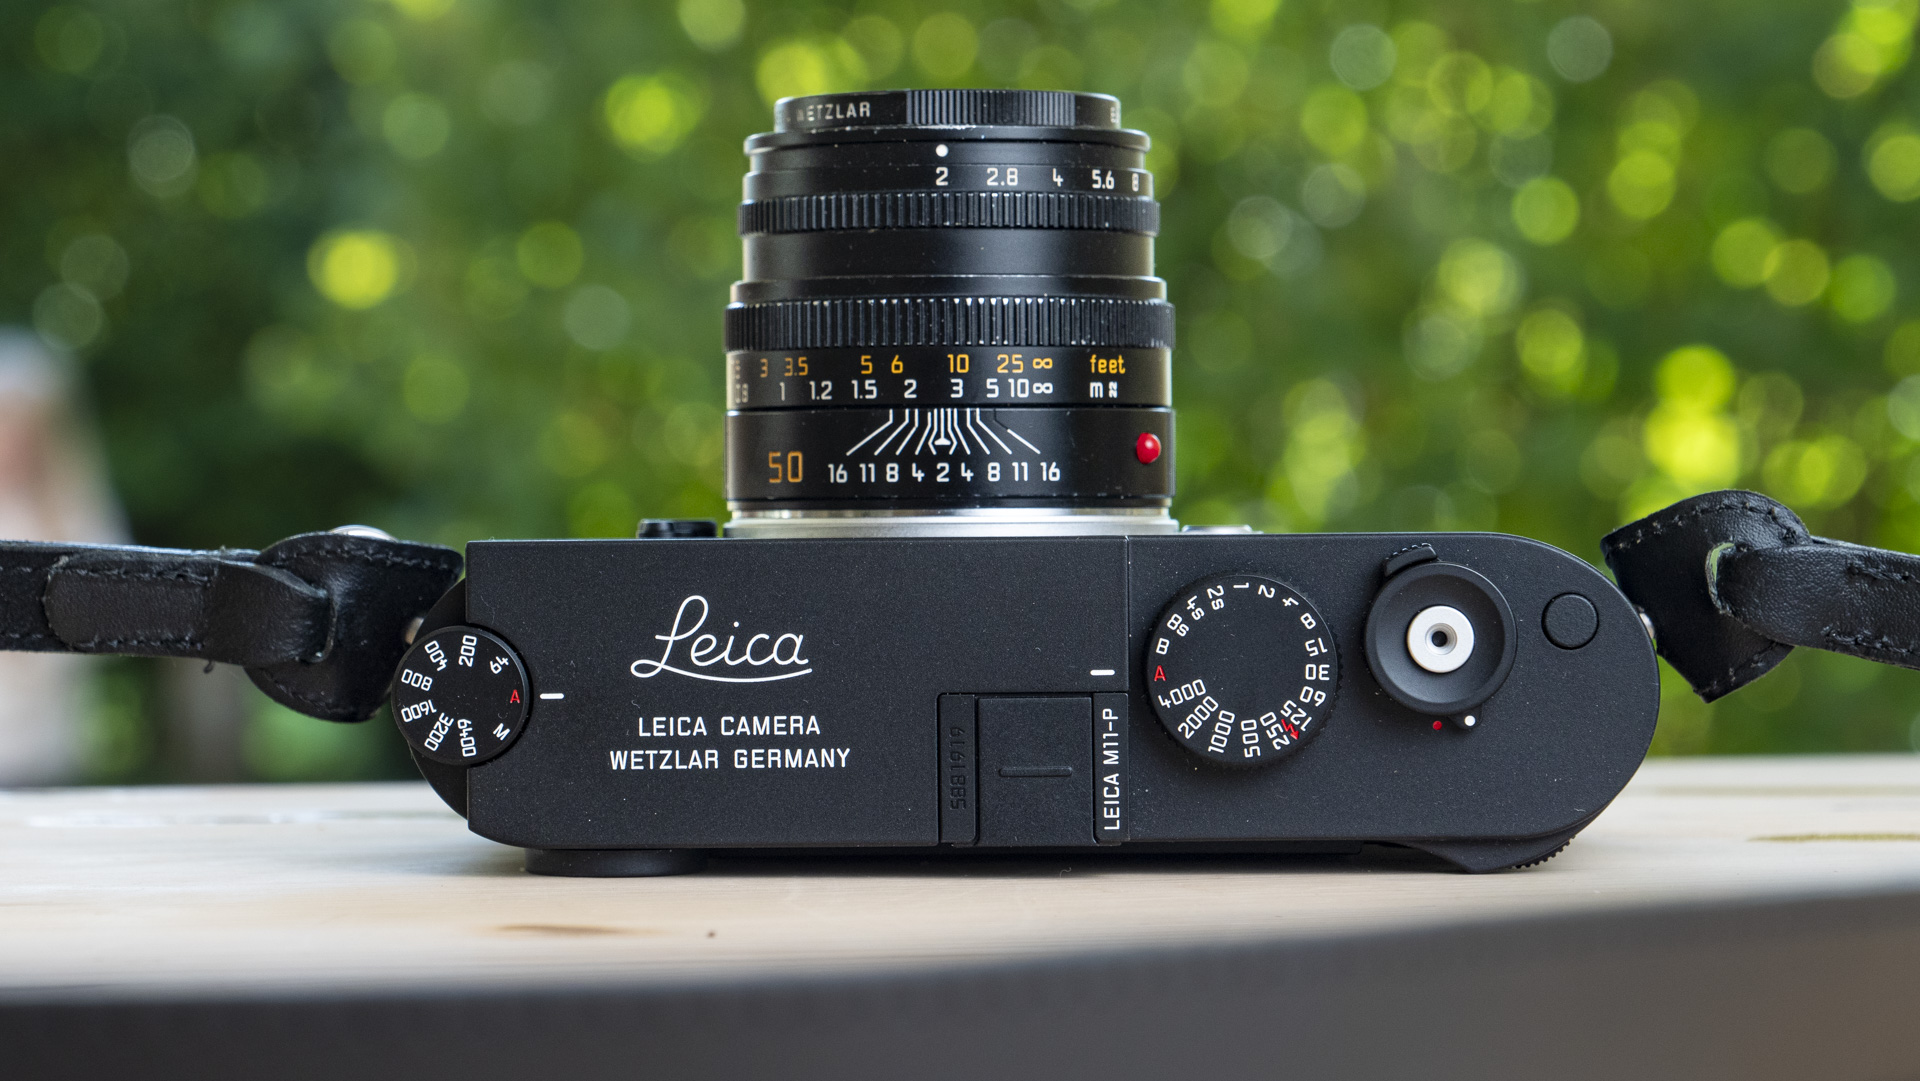 Top view of Leica M11-P on a wooden table with a 50mm f/2 lens mounted